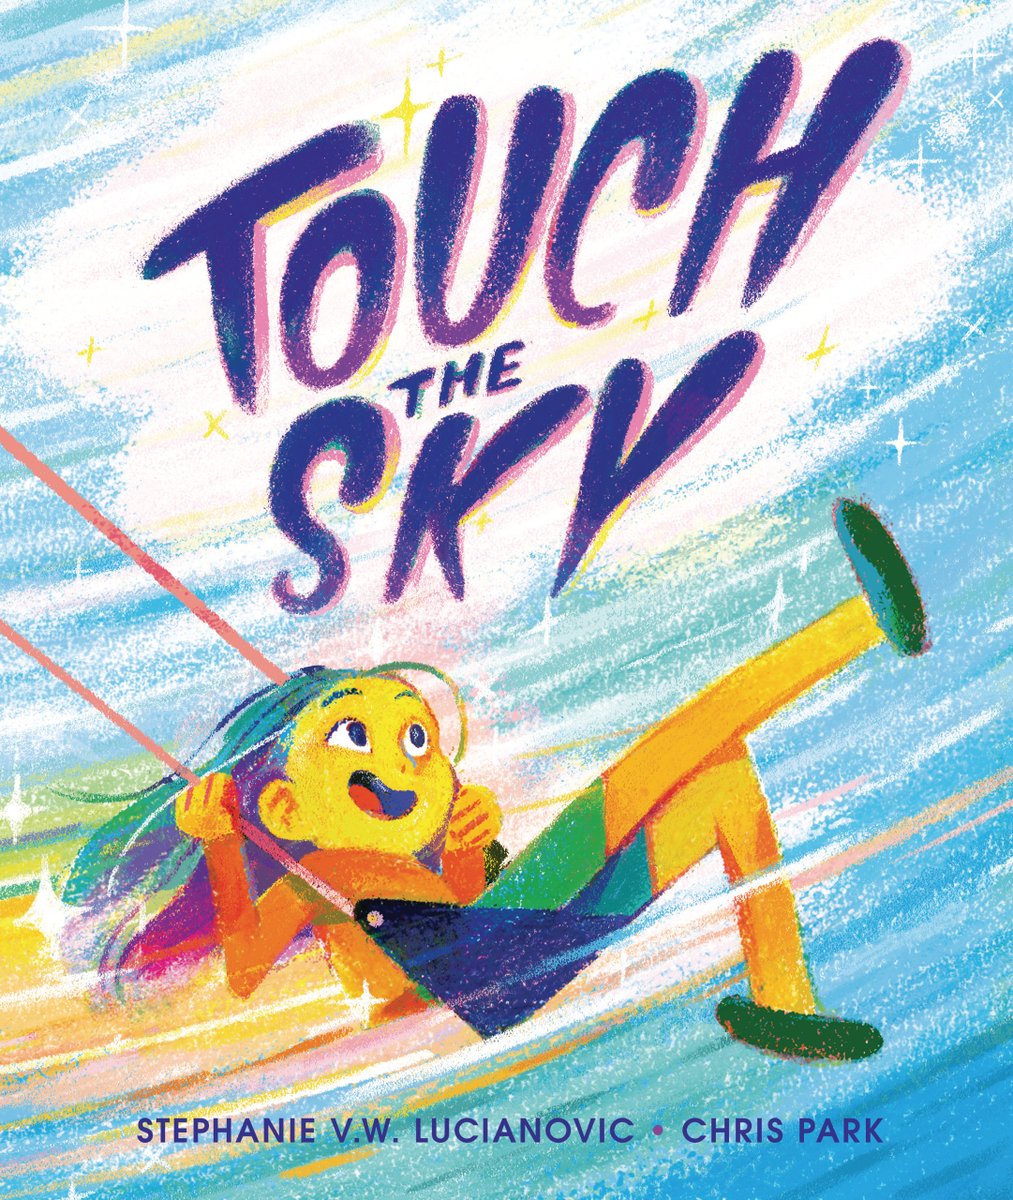 Teacher and librarian love for TOUCH THE SKY out 🩵next🩵 week! 'Fantastically colorful book with great illustrations and story ... If you are looking to read a fun book that will make you laugh, then this book is the one.'